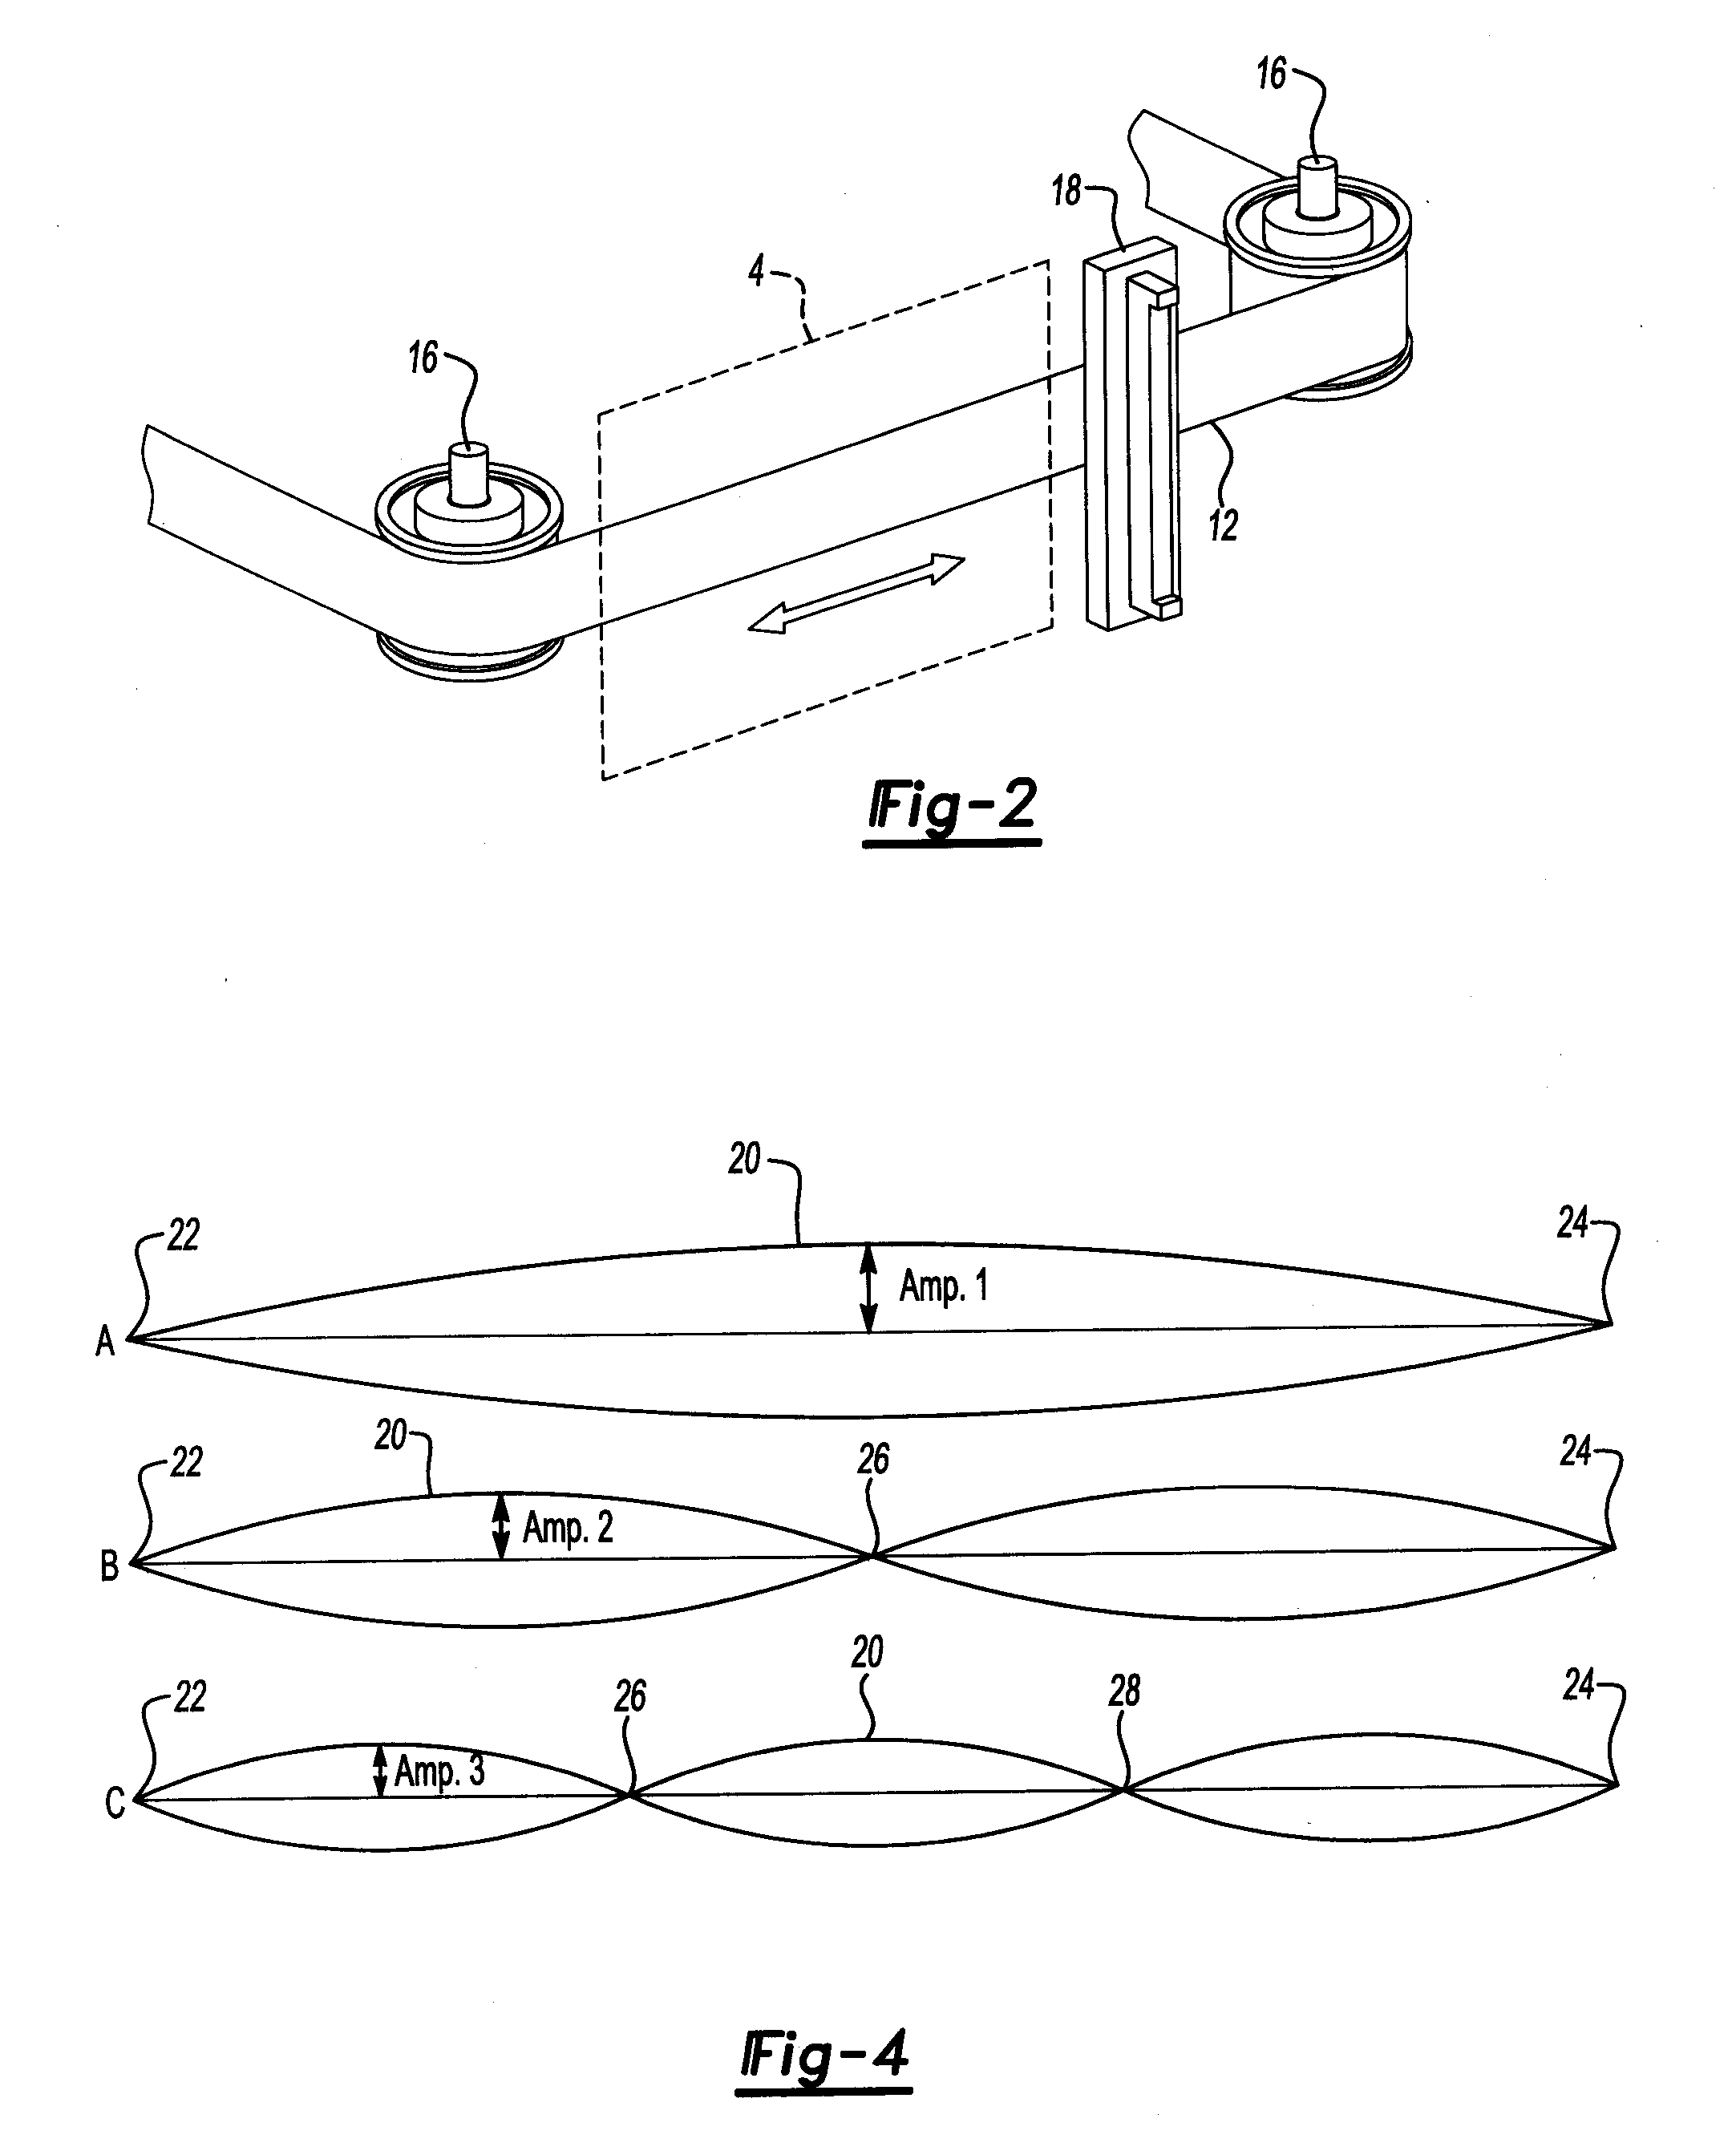 Method for counteracting longitudinal oscillations of magnetic tape in a tape drive system